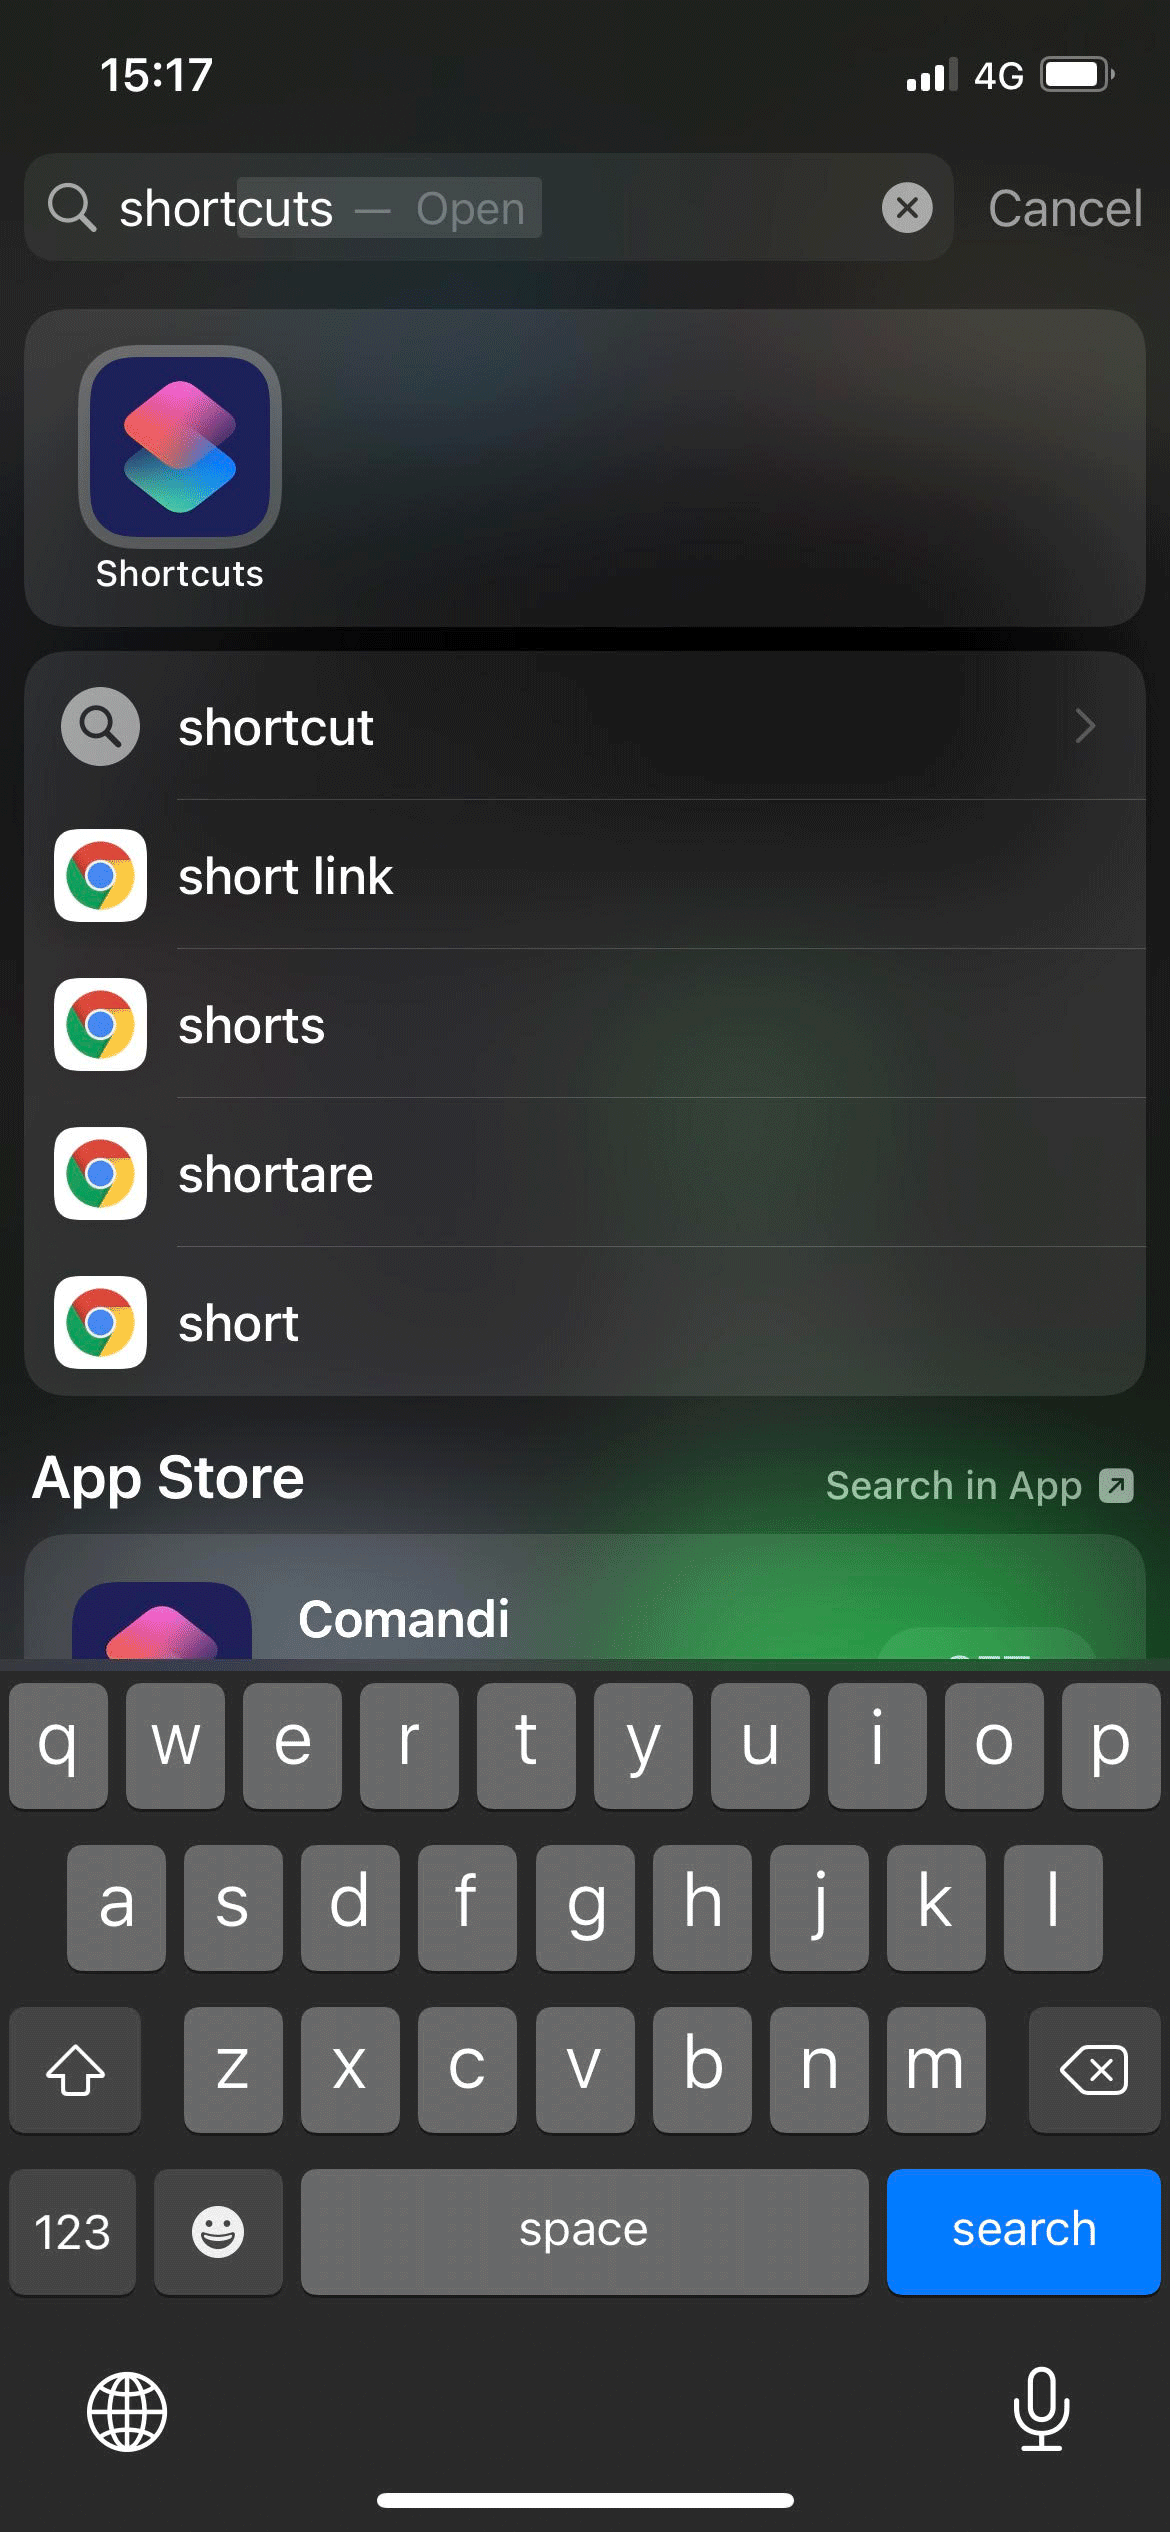 Accessing the shortcut app in order to set up the IFTTT command